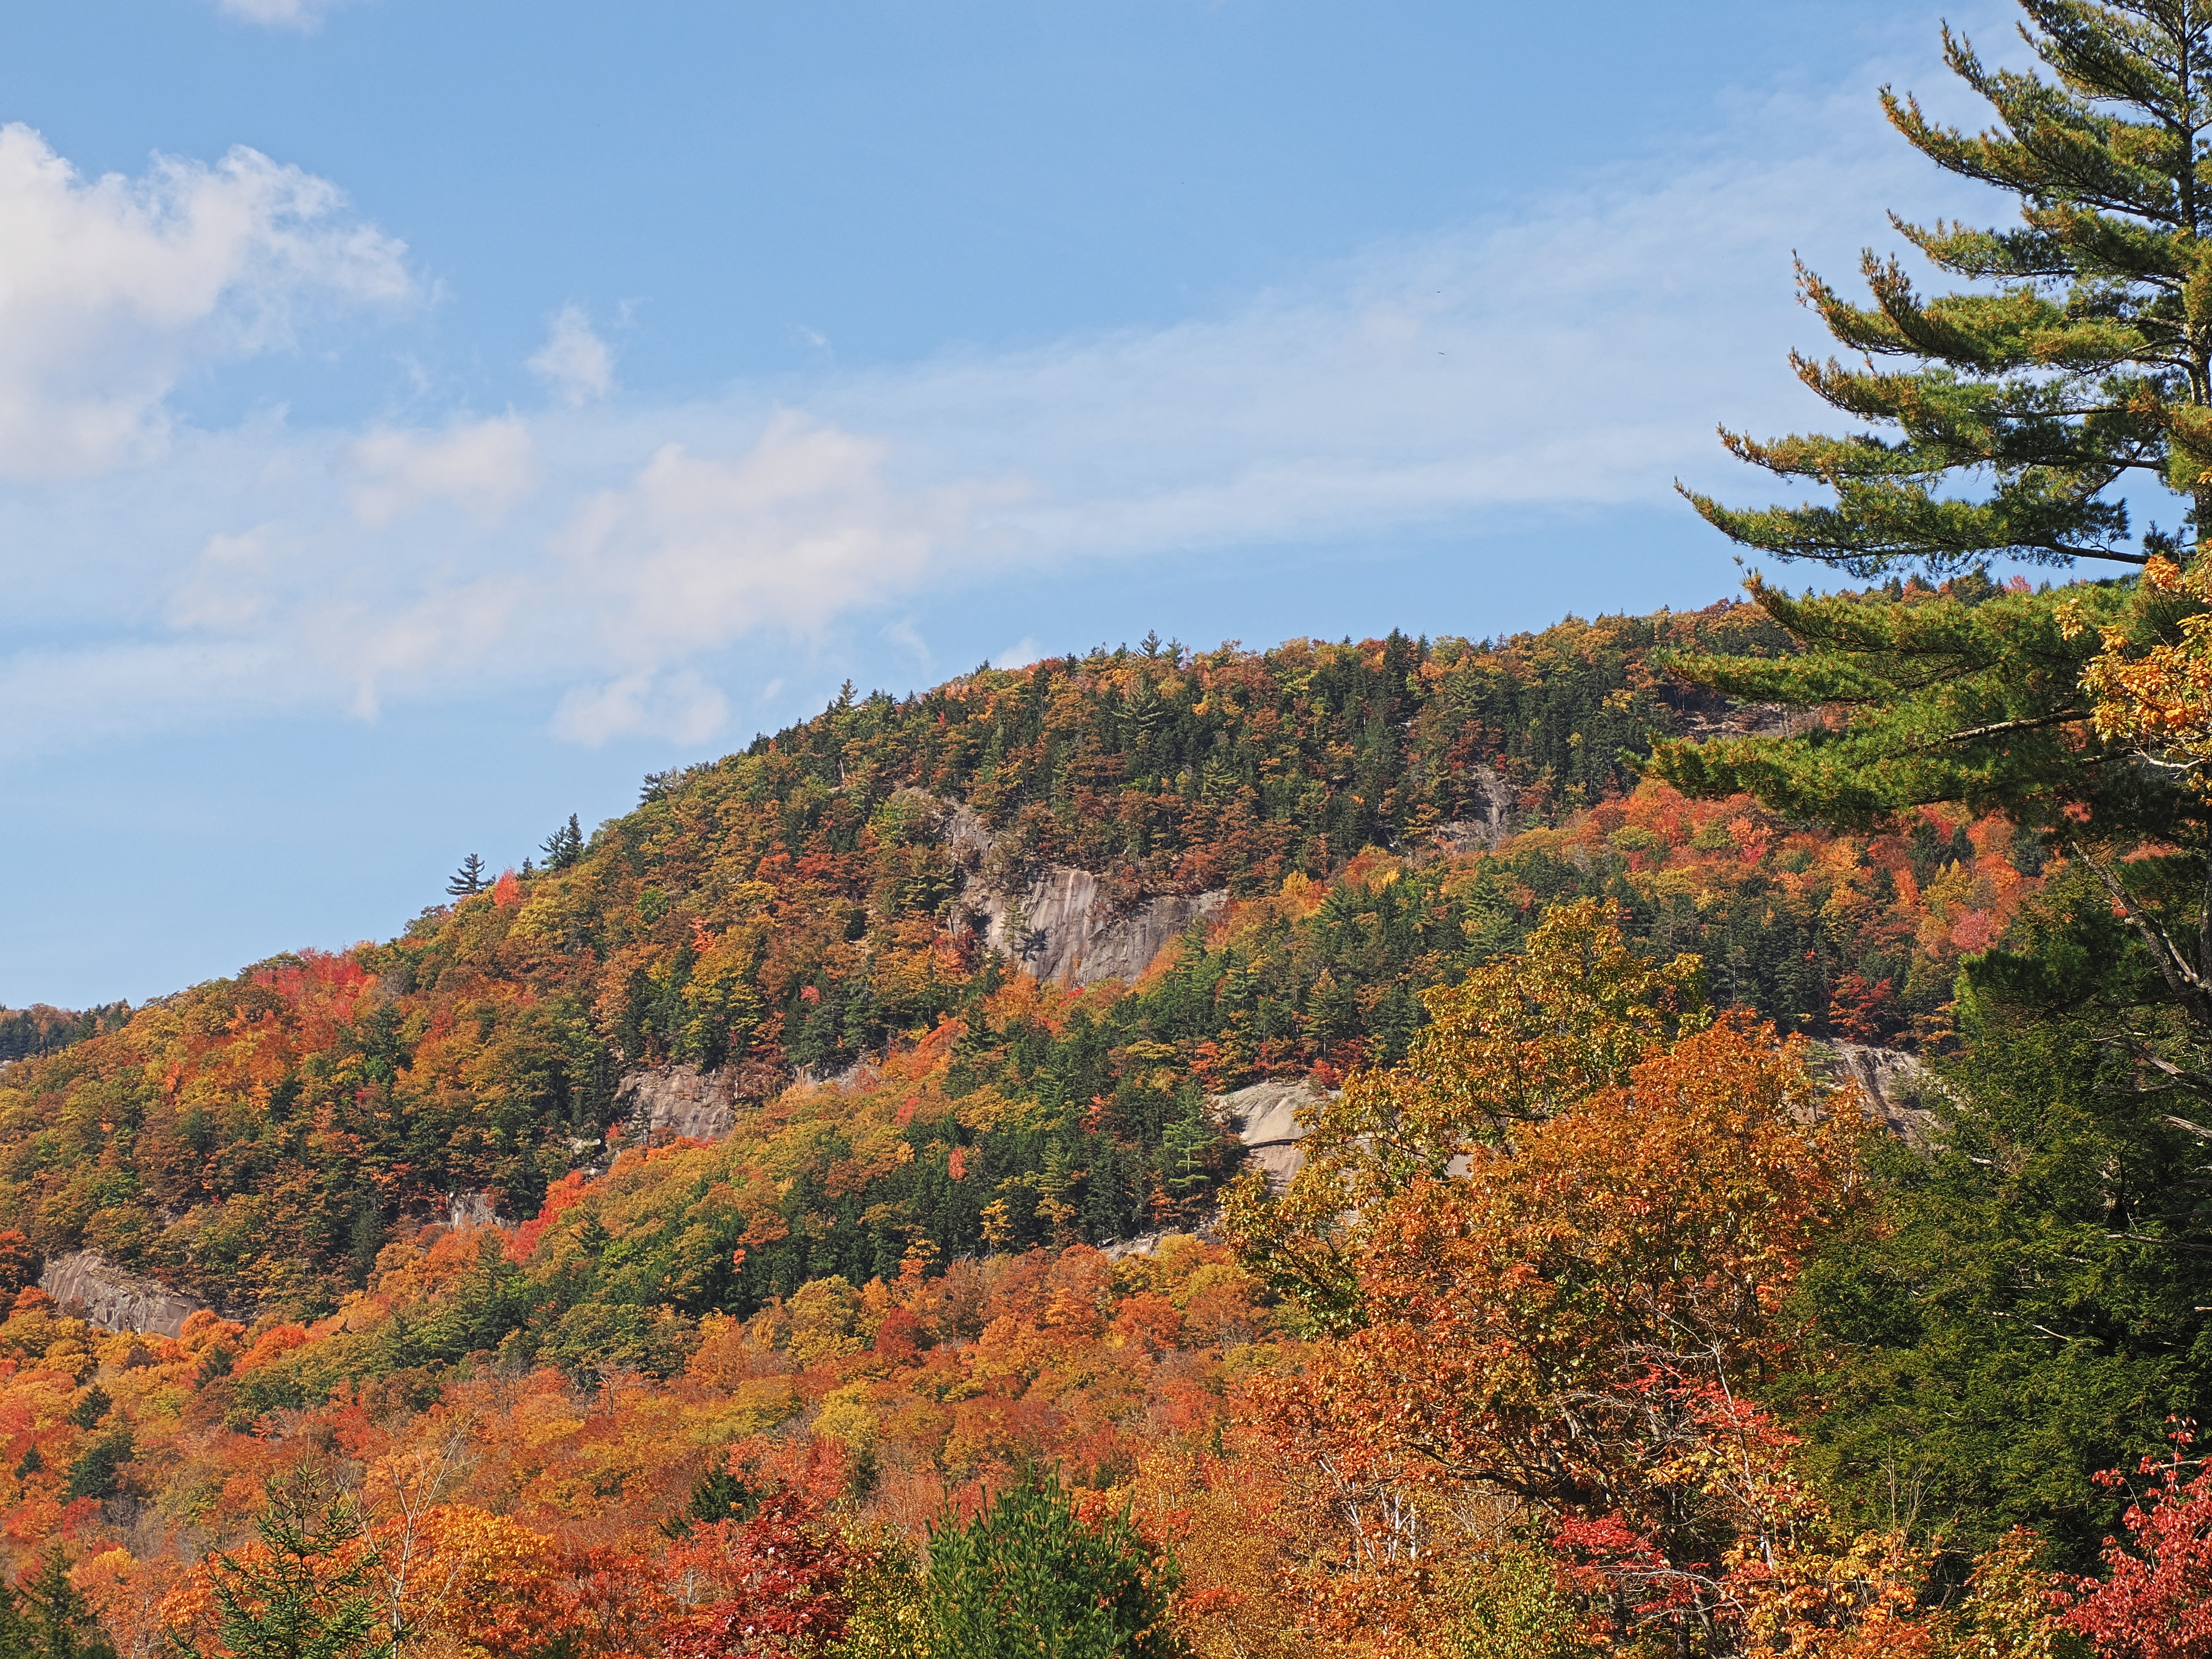 Fall colors at the Kancamagus Scenic Byway #24